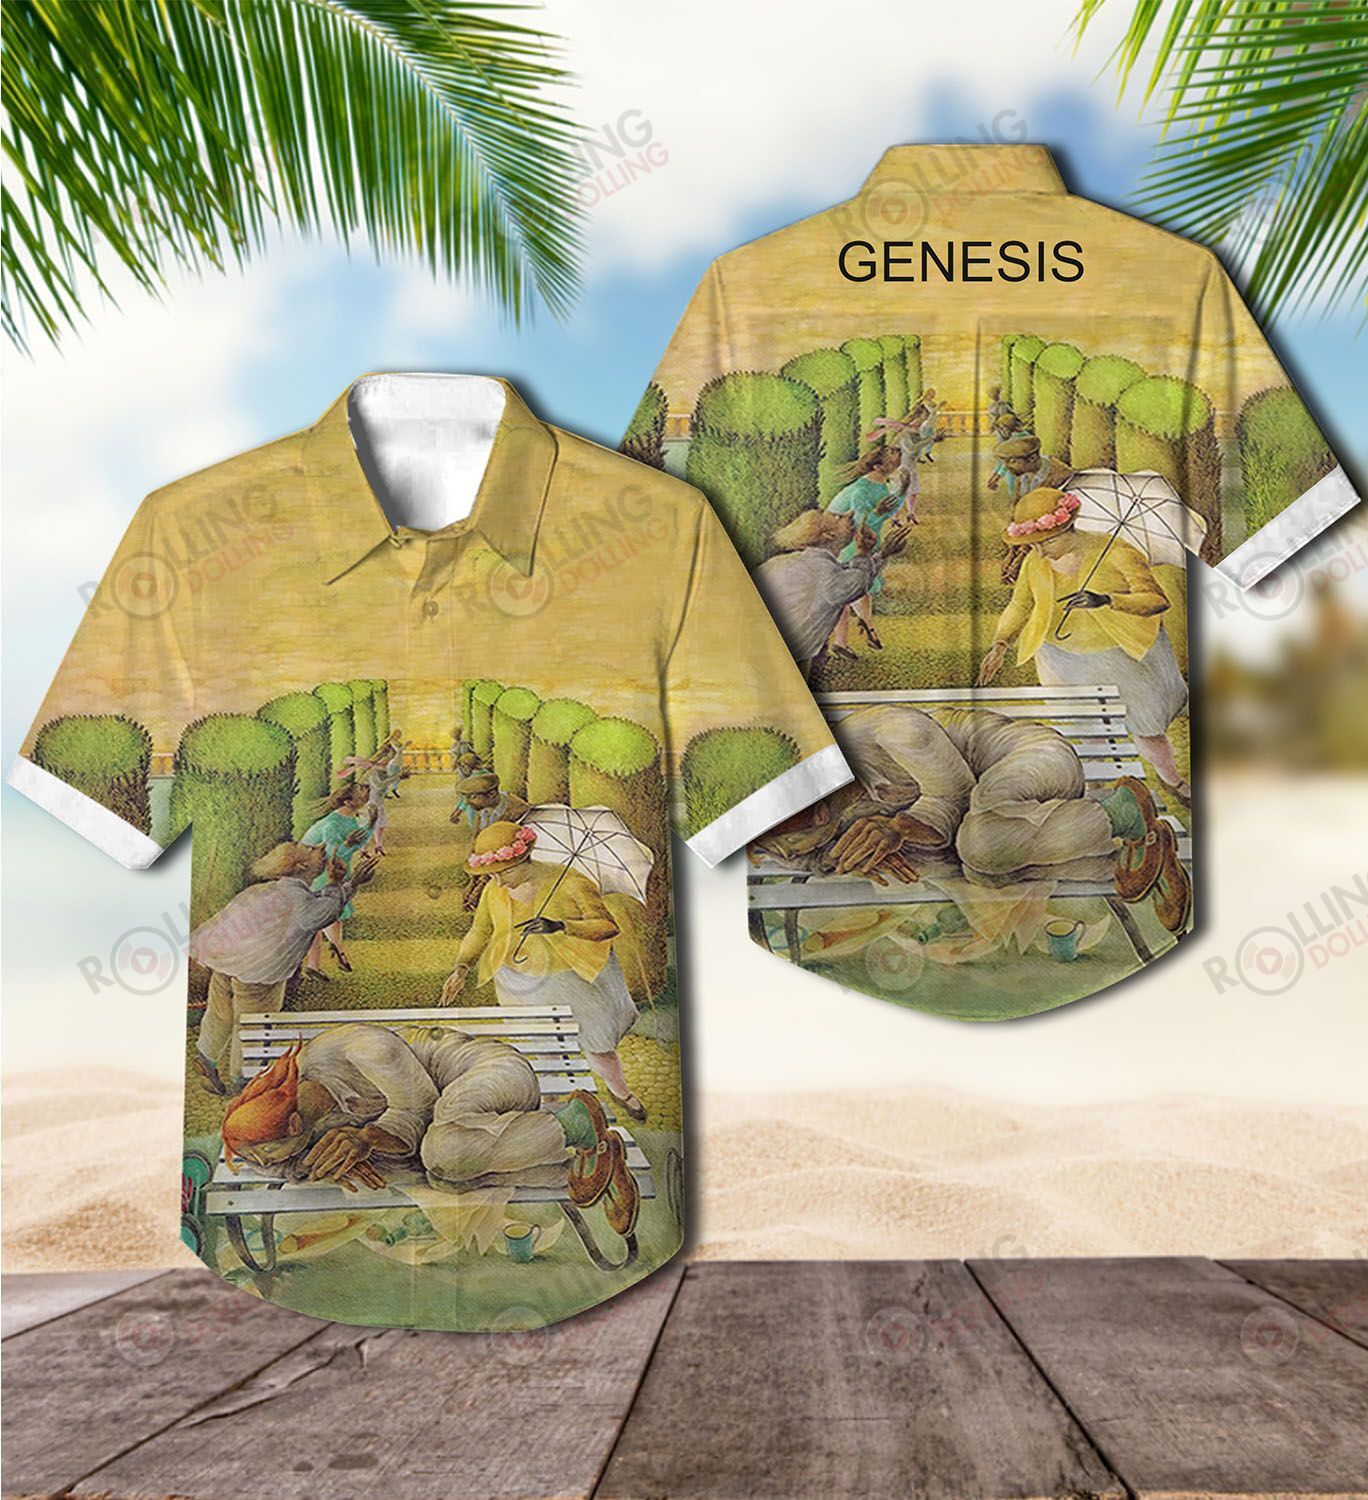 This would make a great gift for any fan who loves Hawaiian Shirt as well as Rock band 57